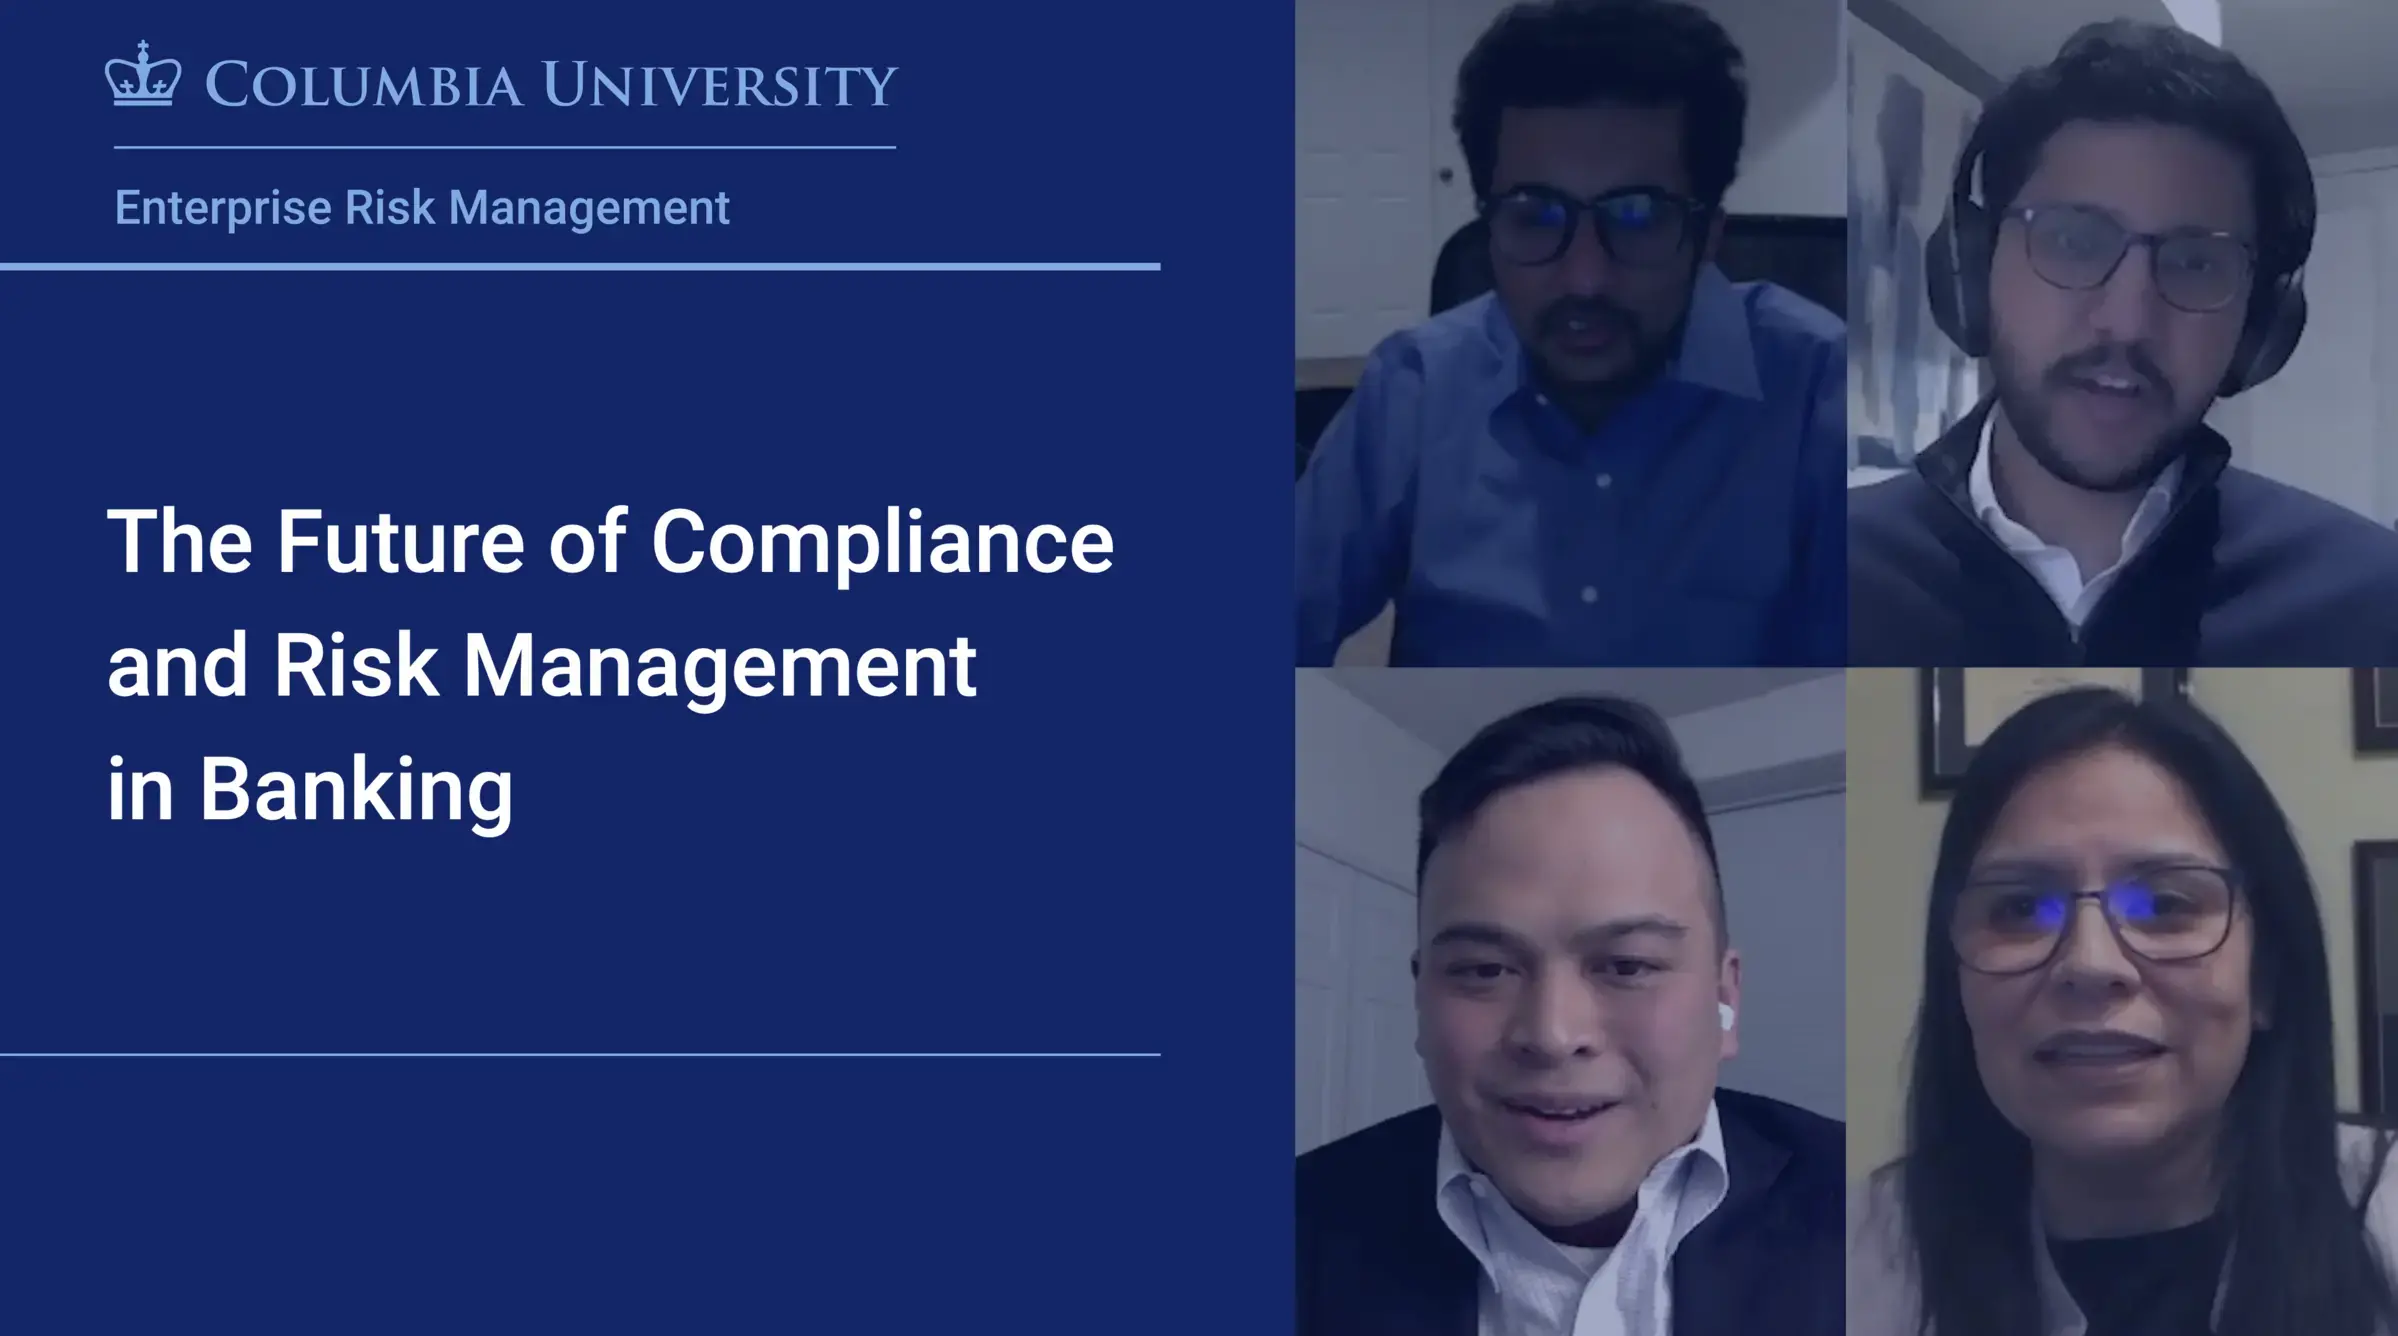 The Future of Compliance and Risk Management in Banking Event